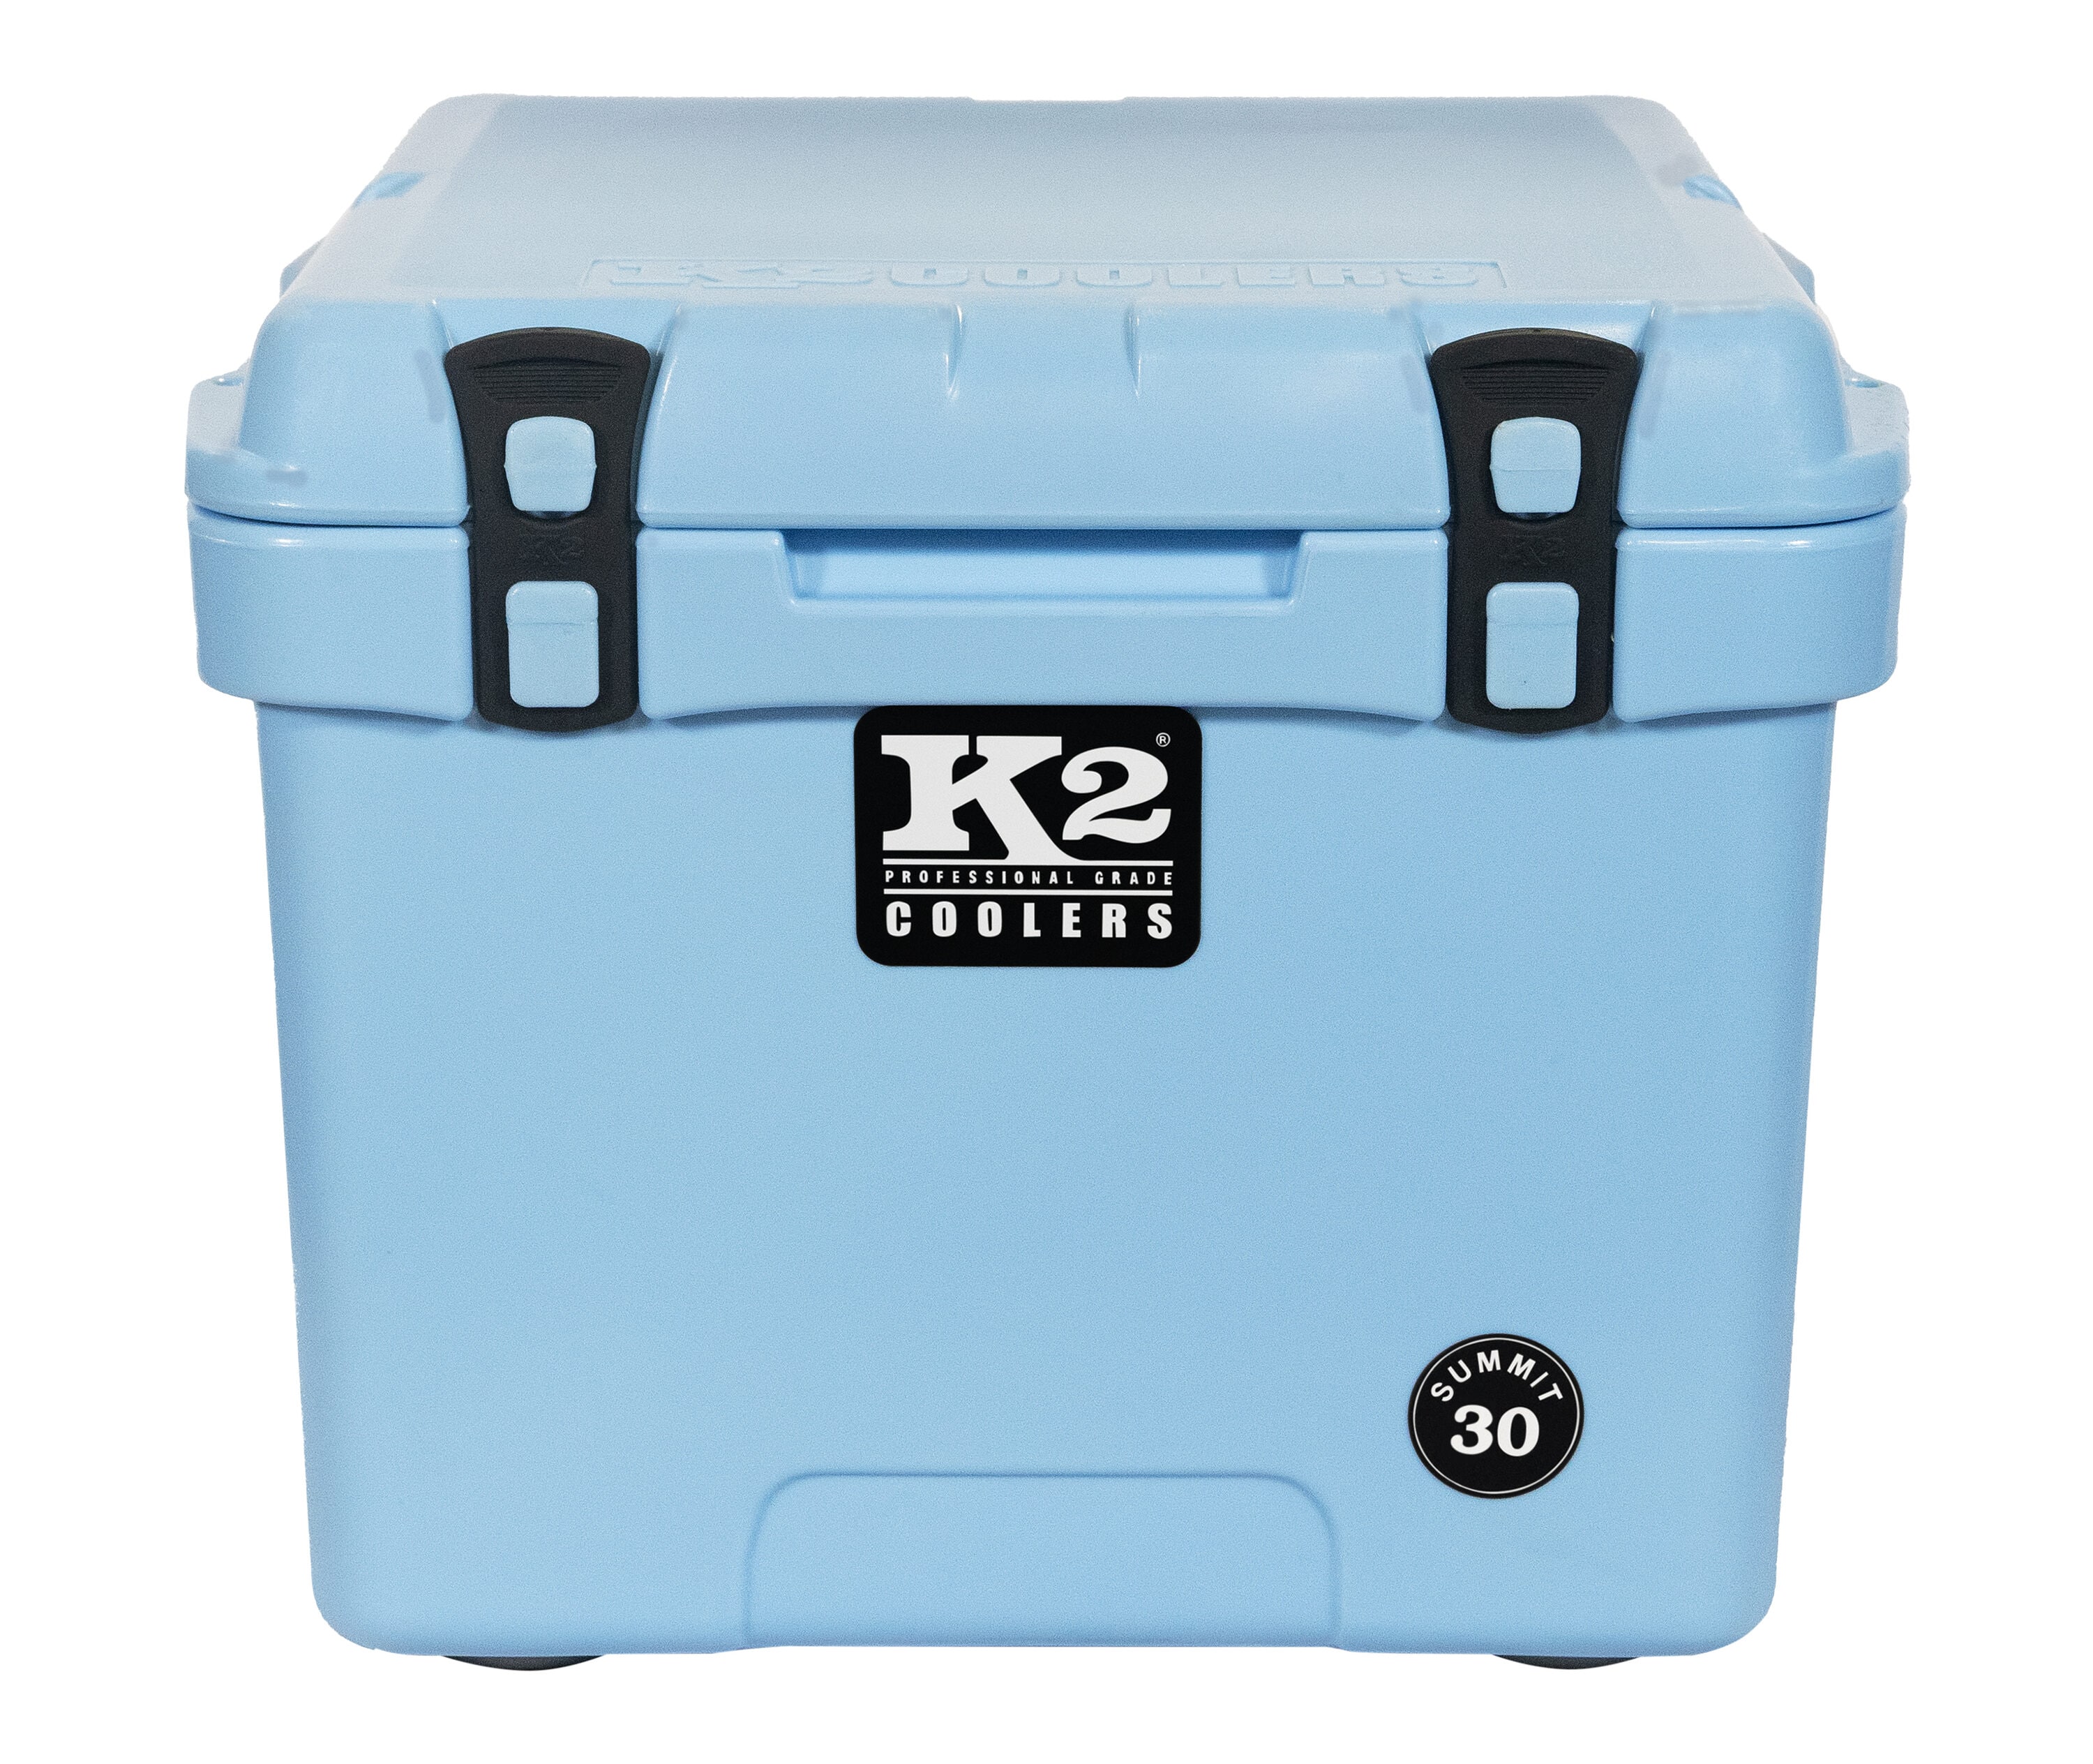 K2 Summit 5 Gallon Water Jug, Blue and White